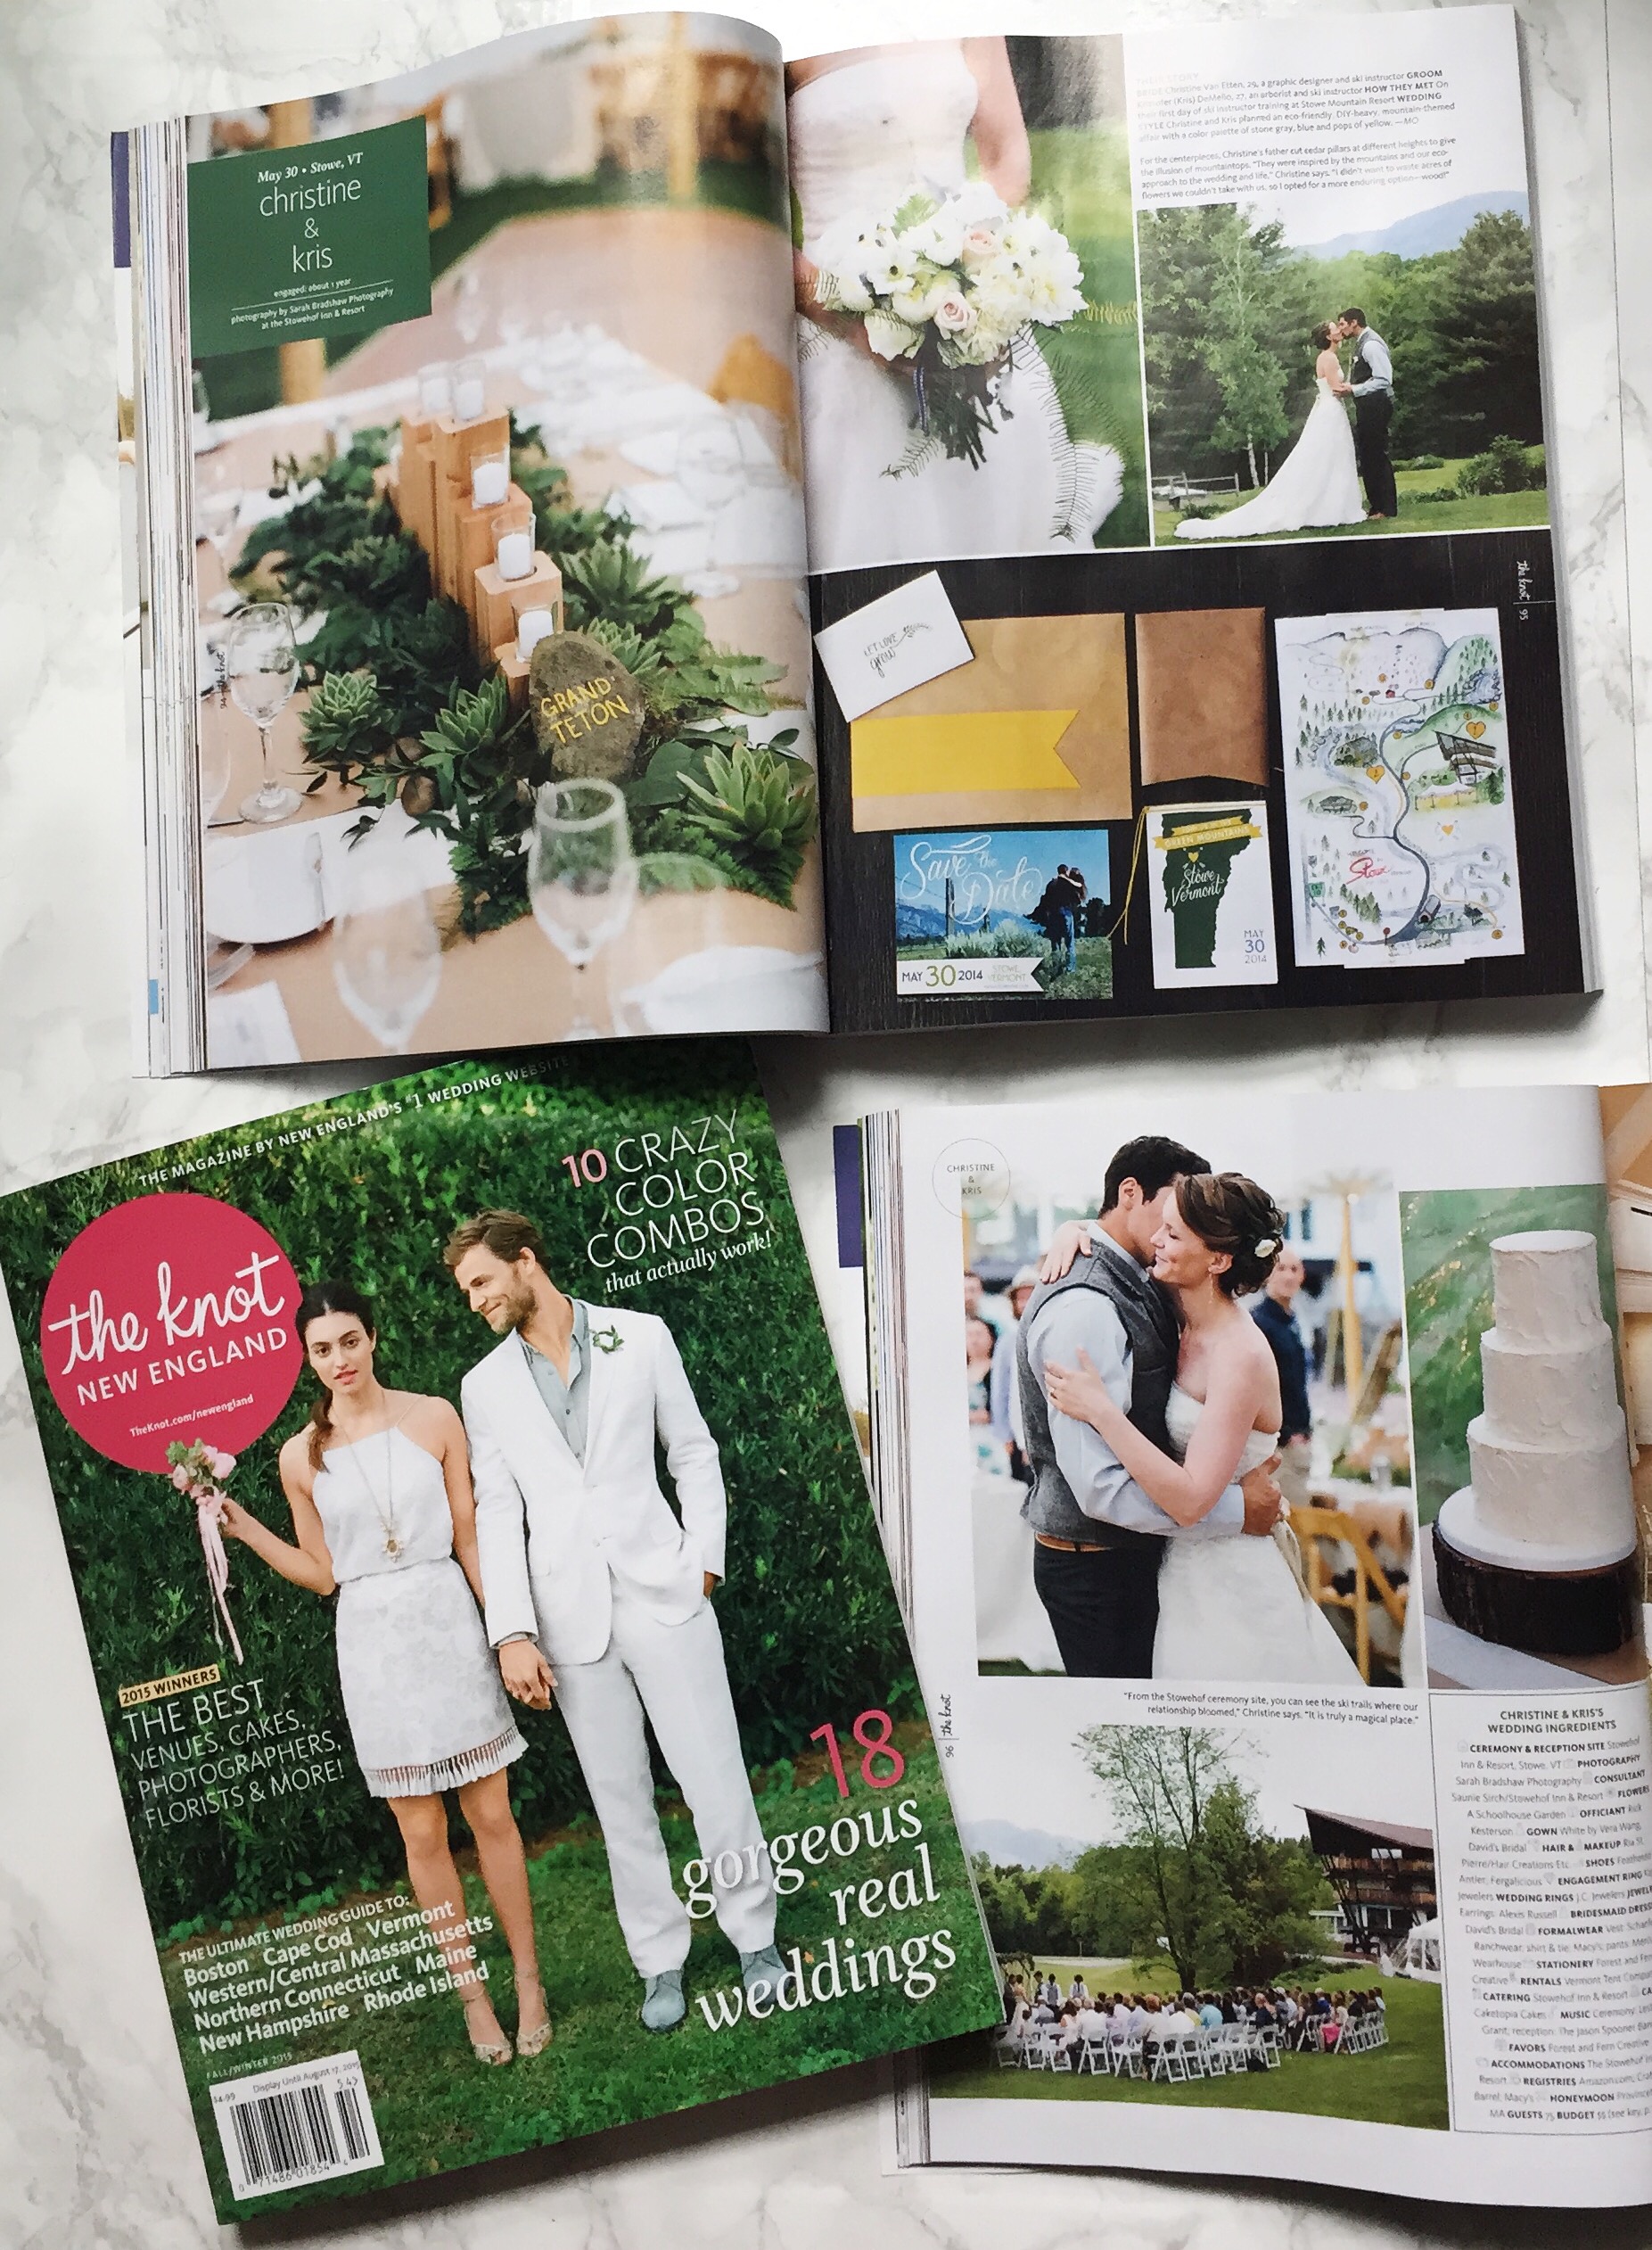 Published in The Knot: New England